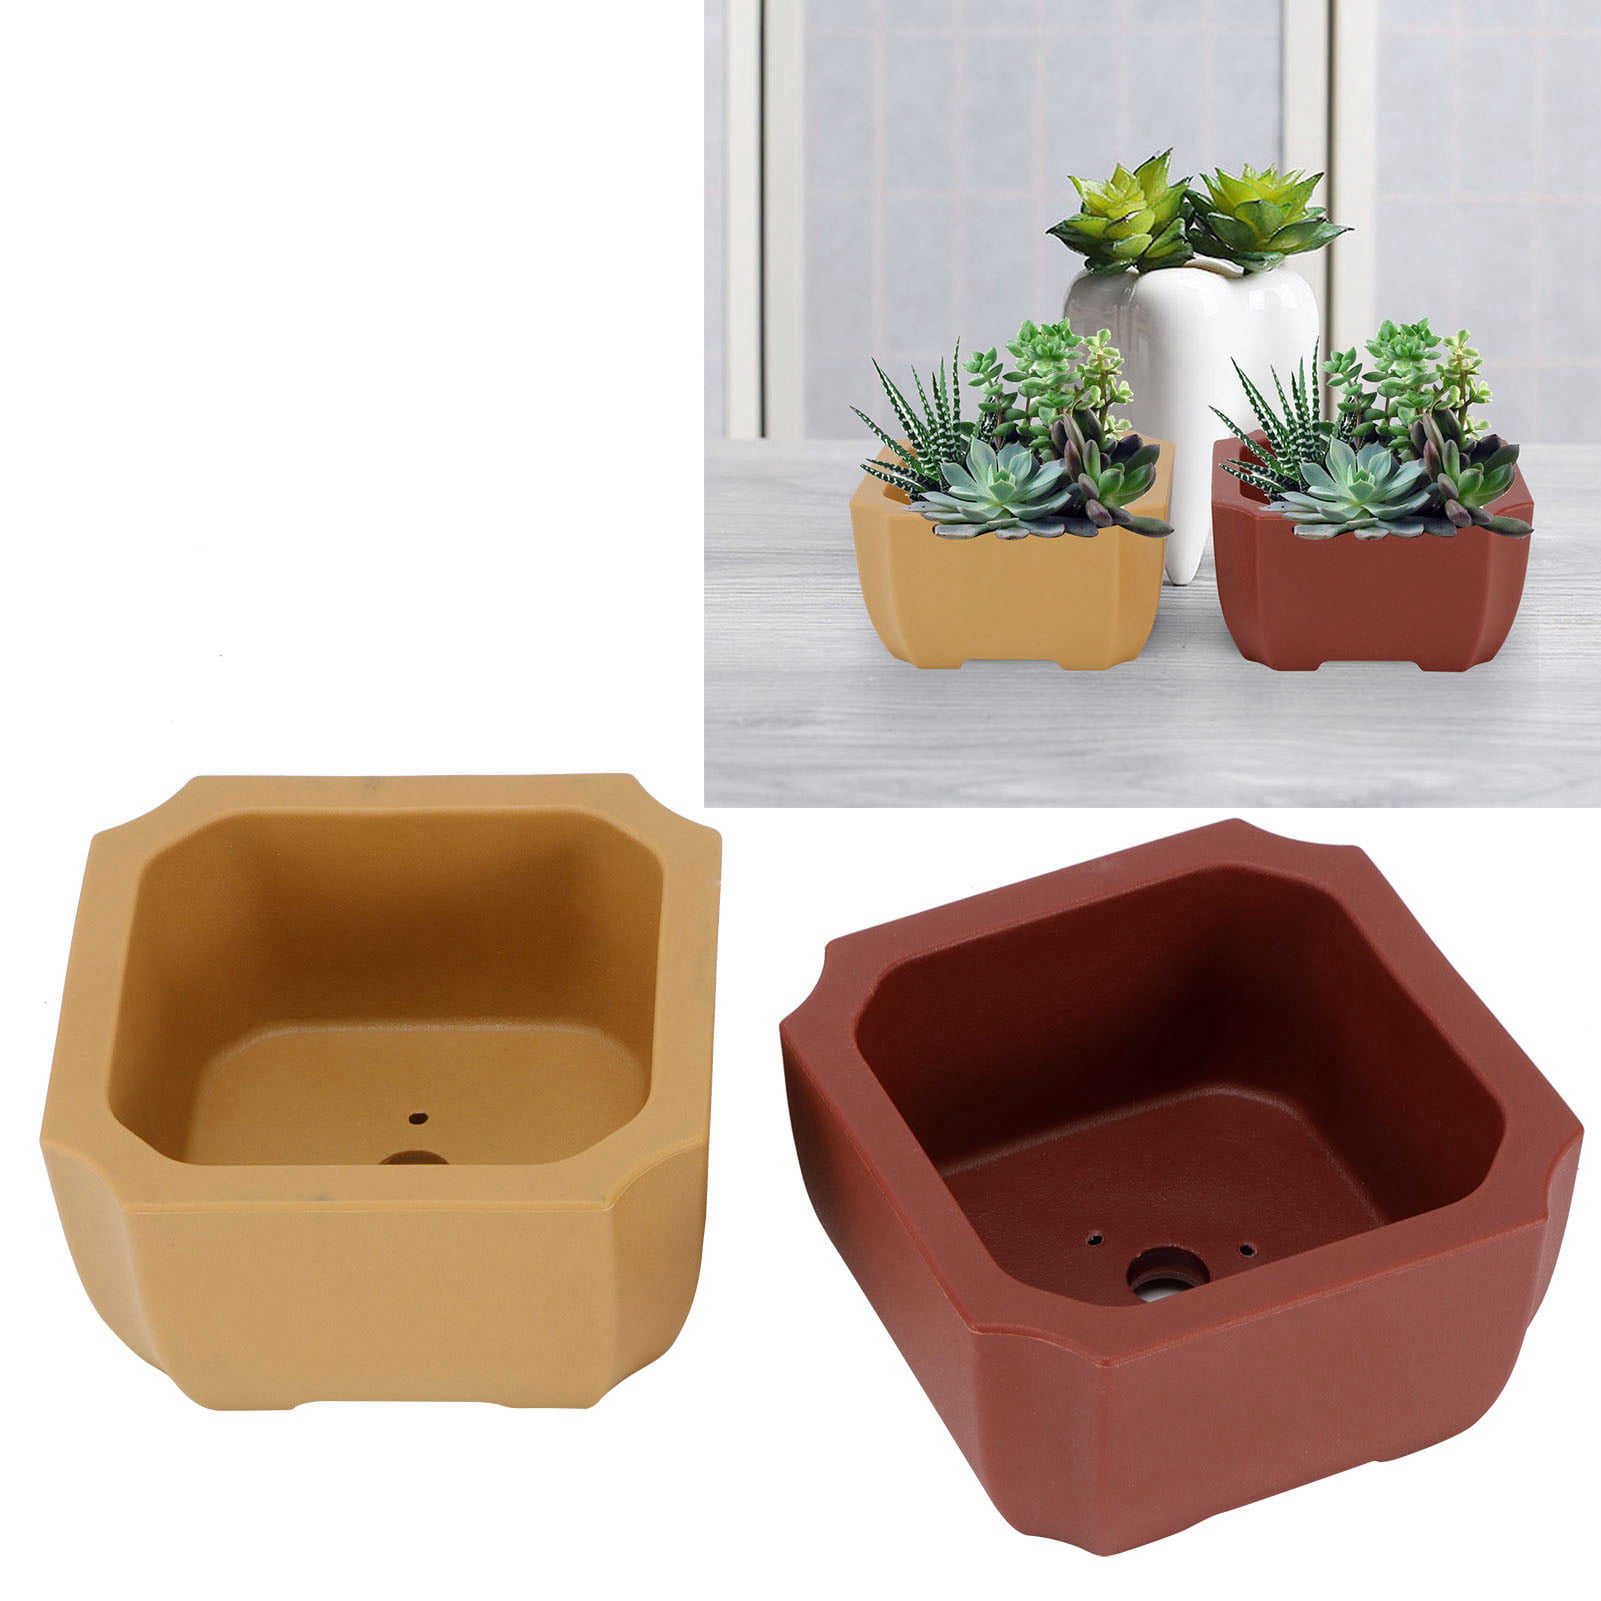 Details about   1pc Reusable Soil Testing Tool for Flowerpot  Greenery Plant 